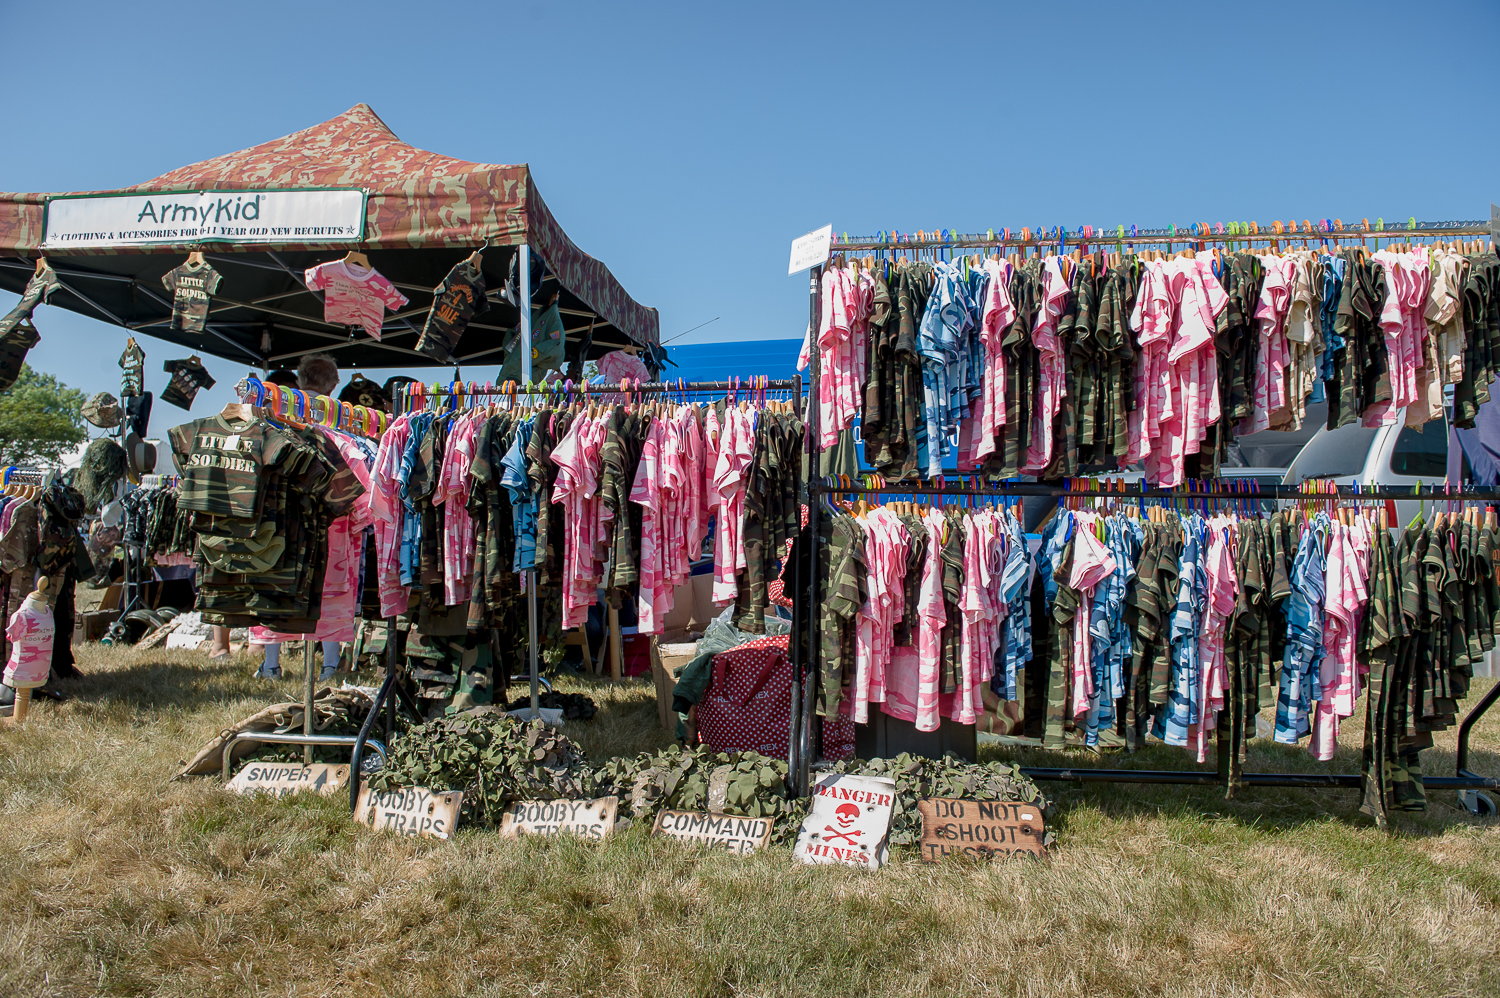  "Army Kids" stall at War and peace show, kent 